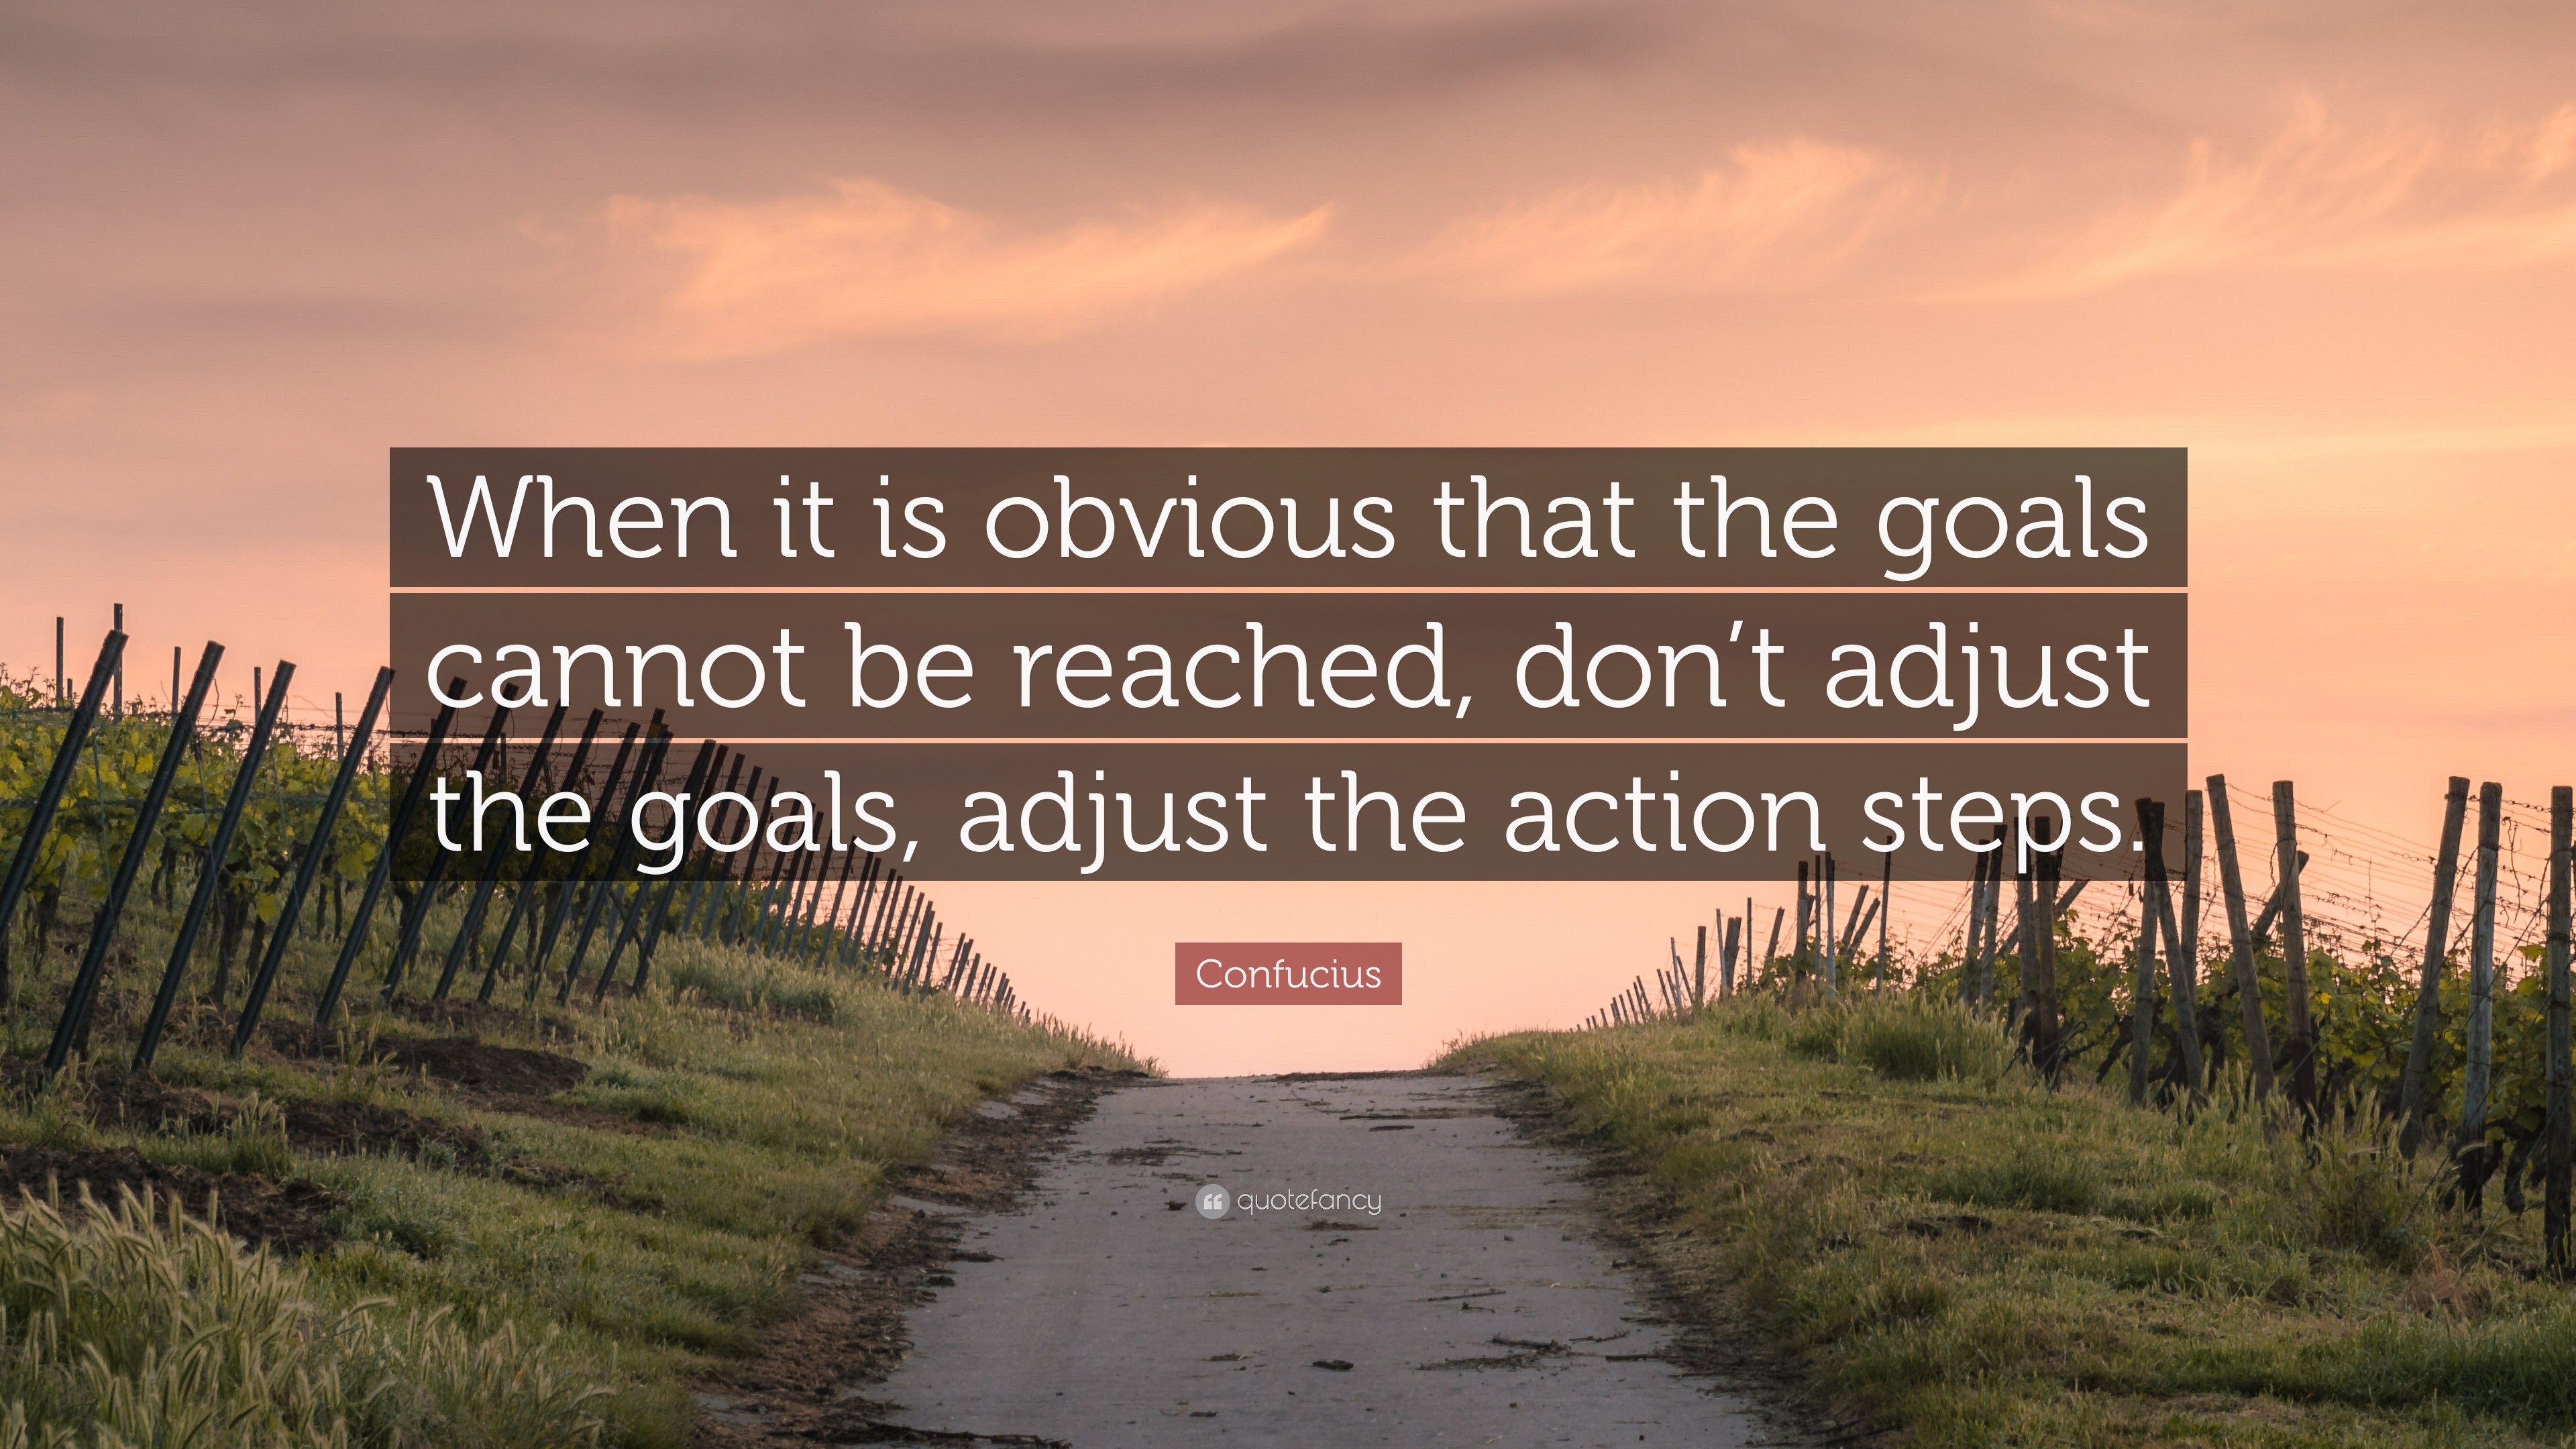 When it is obvious that the goals cannot be reached, don't adjust